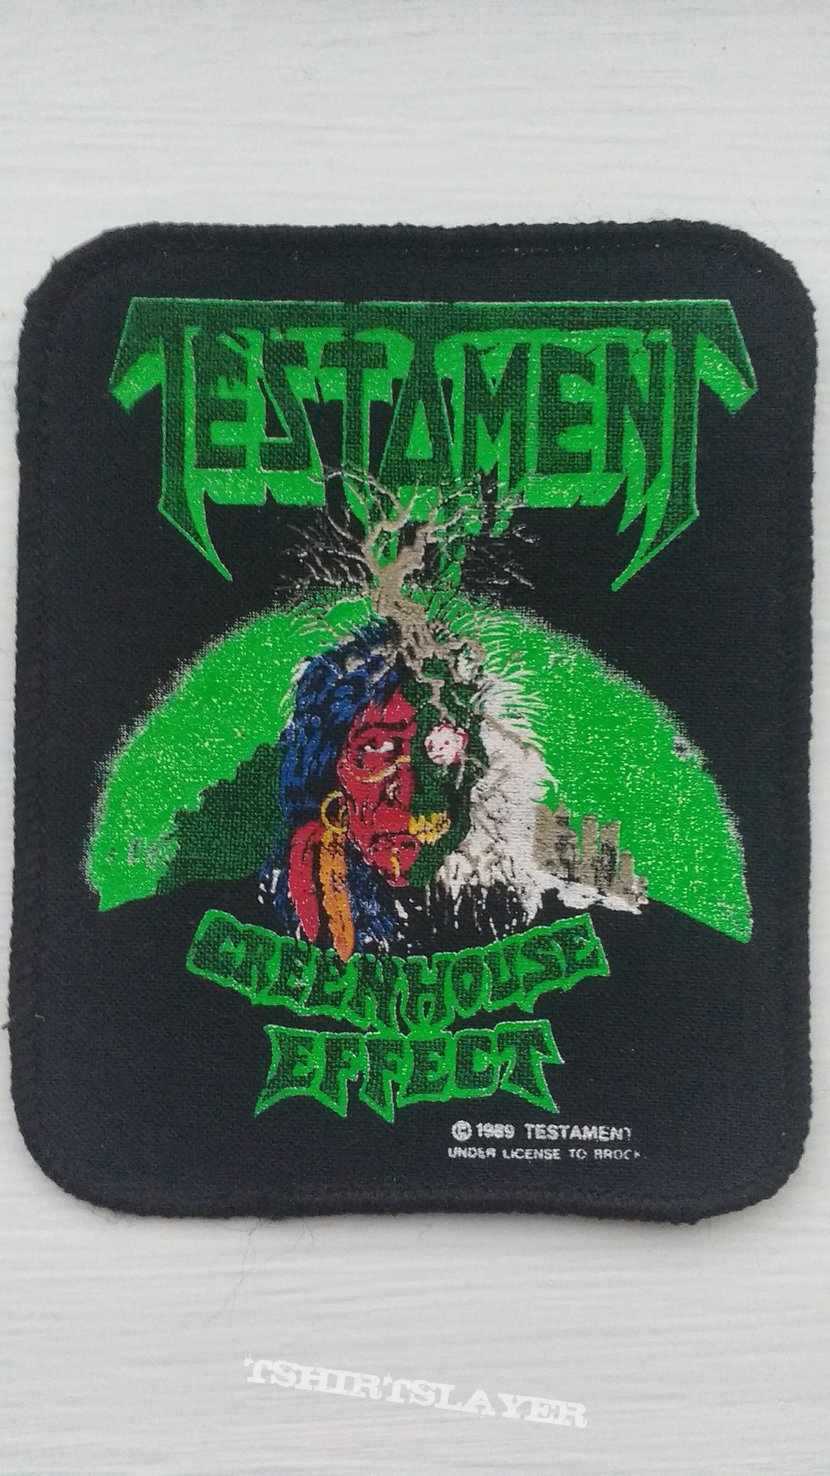 Testament - Greenhouse Effect vintage printed patch